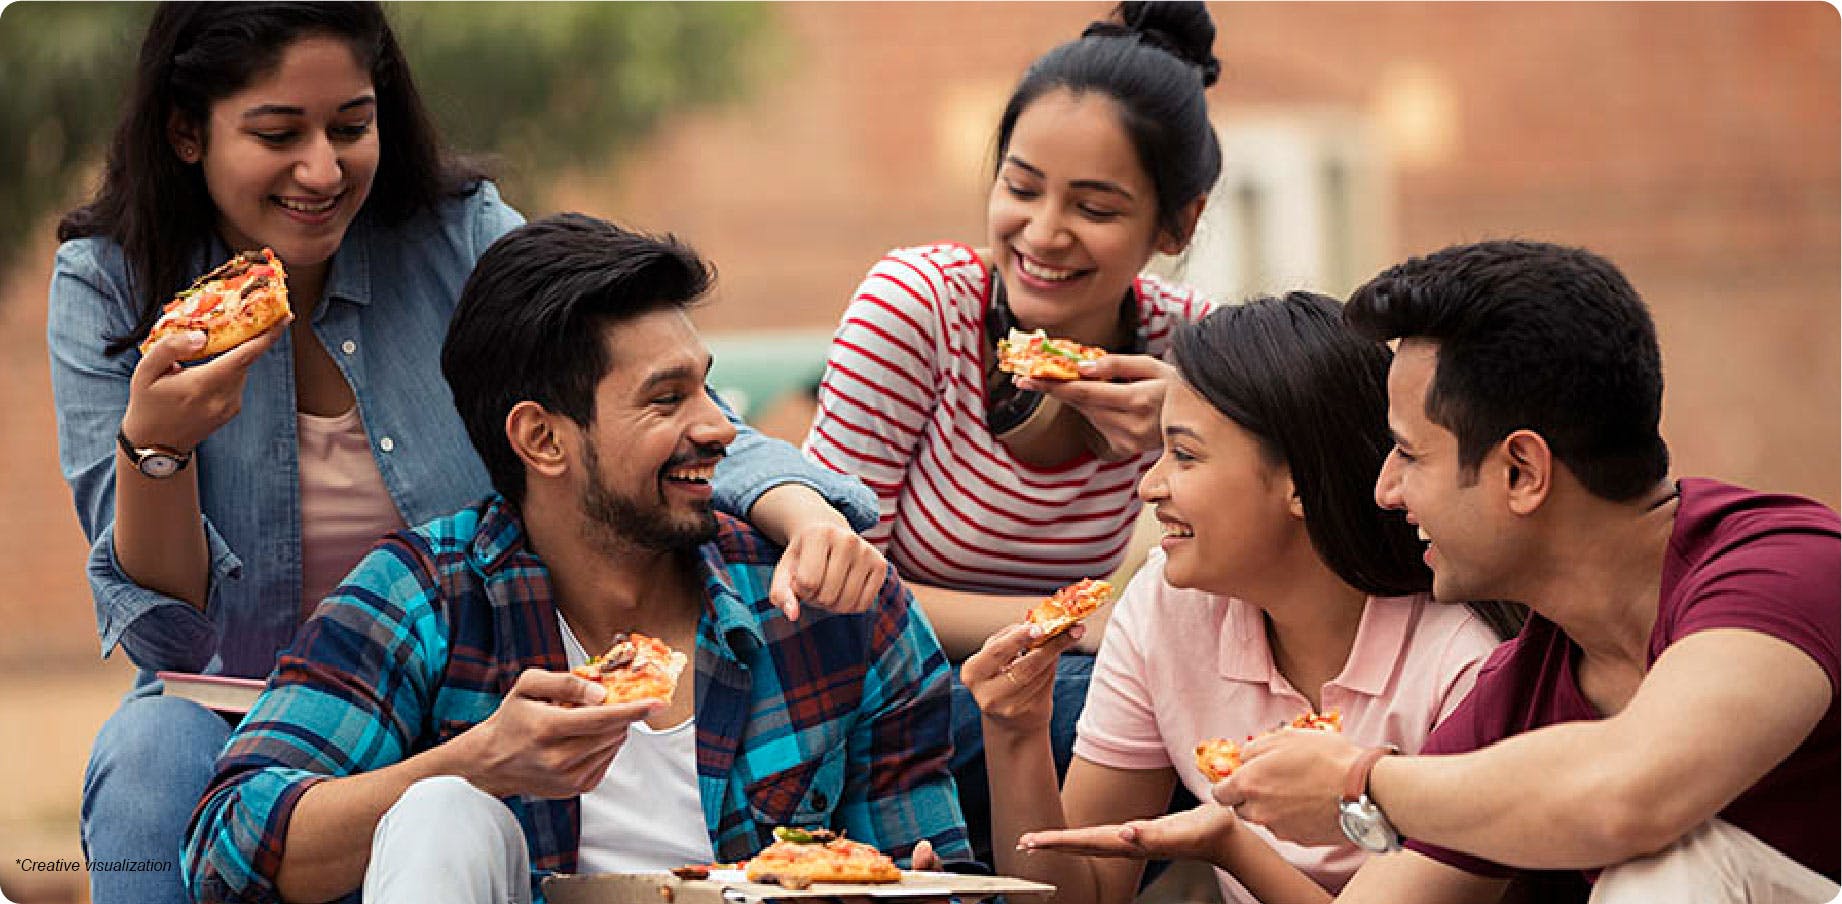 Young group of friends laughing and eating pizza